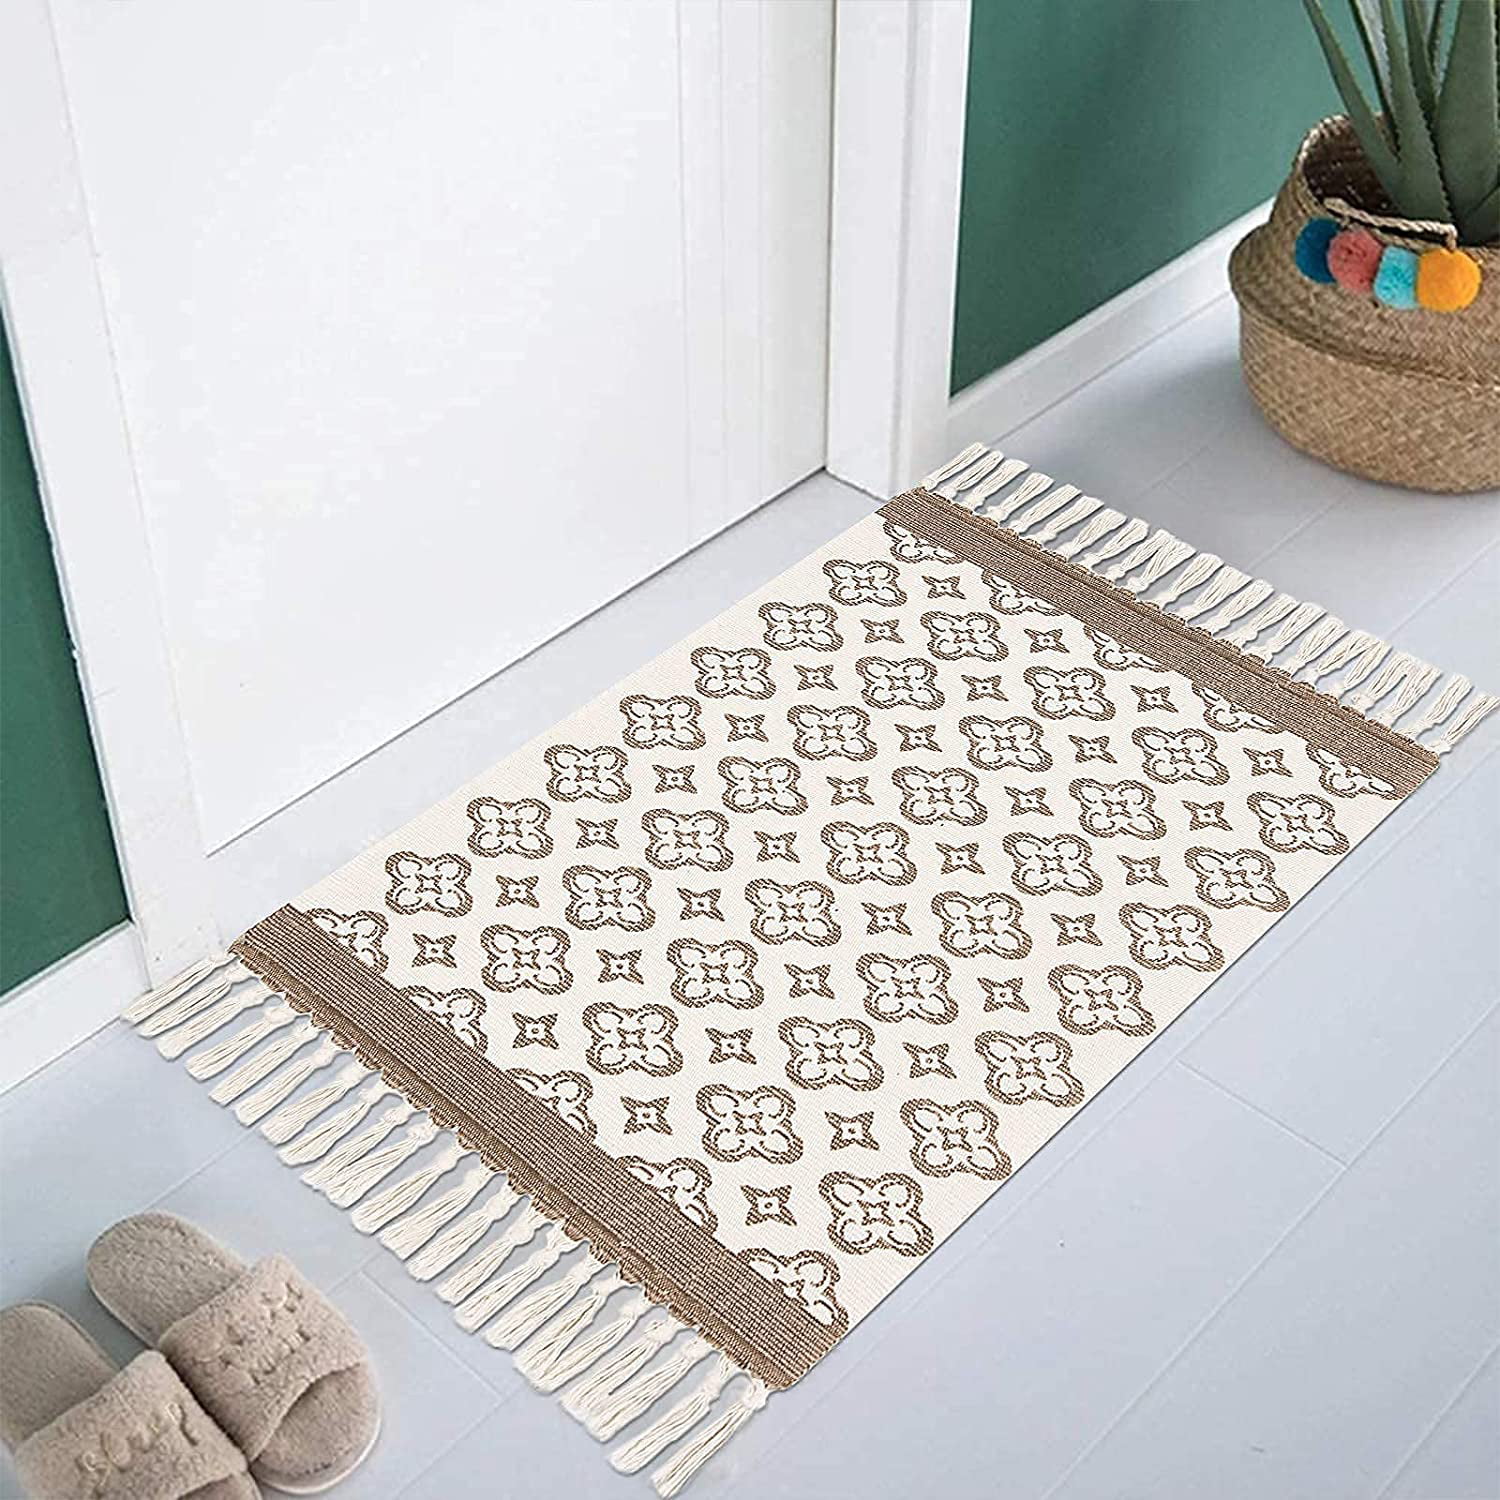 Laundry Room 60x90 cm Bathroom Kitchen SHACOS Cotton Area Rug with Tassels Machine Washable Woven Rugs Brown Printed Indoor Area Rug Floor Mat for Living room Bedroom